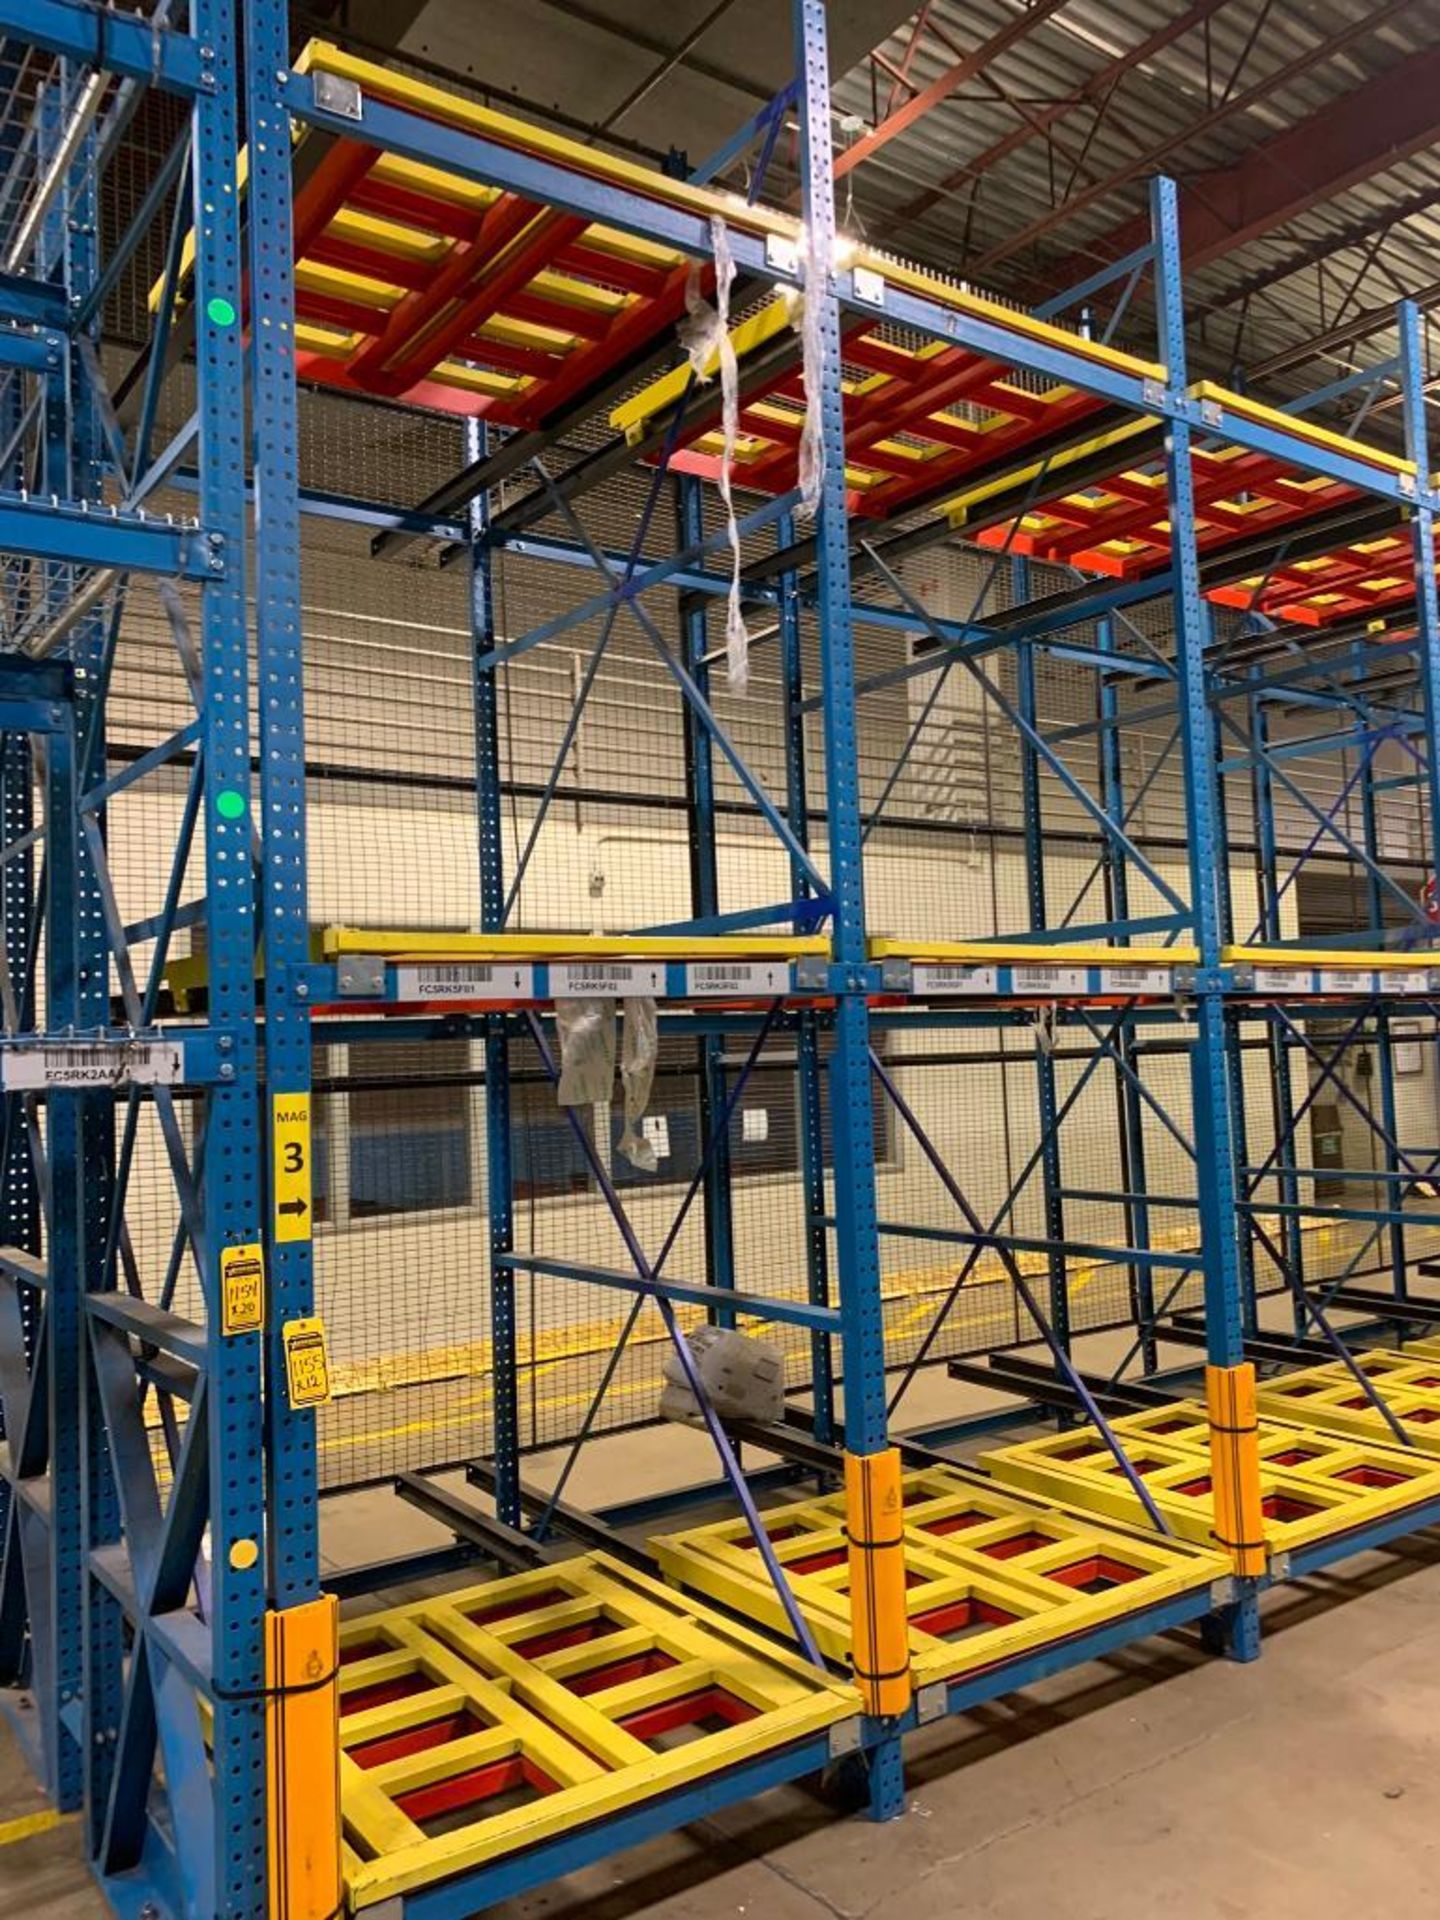 (12x) Bays of Bolt-Together Push-Back Pallet Rack; 15' T X 104" D, Each Bay Has (6) Pallet Positions - Image 3 of 12